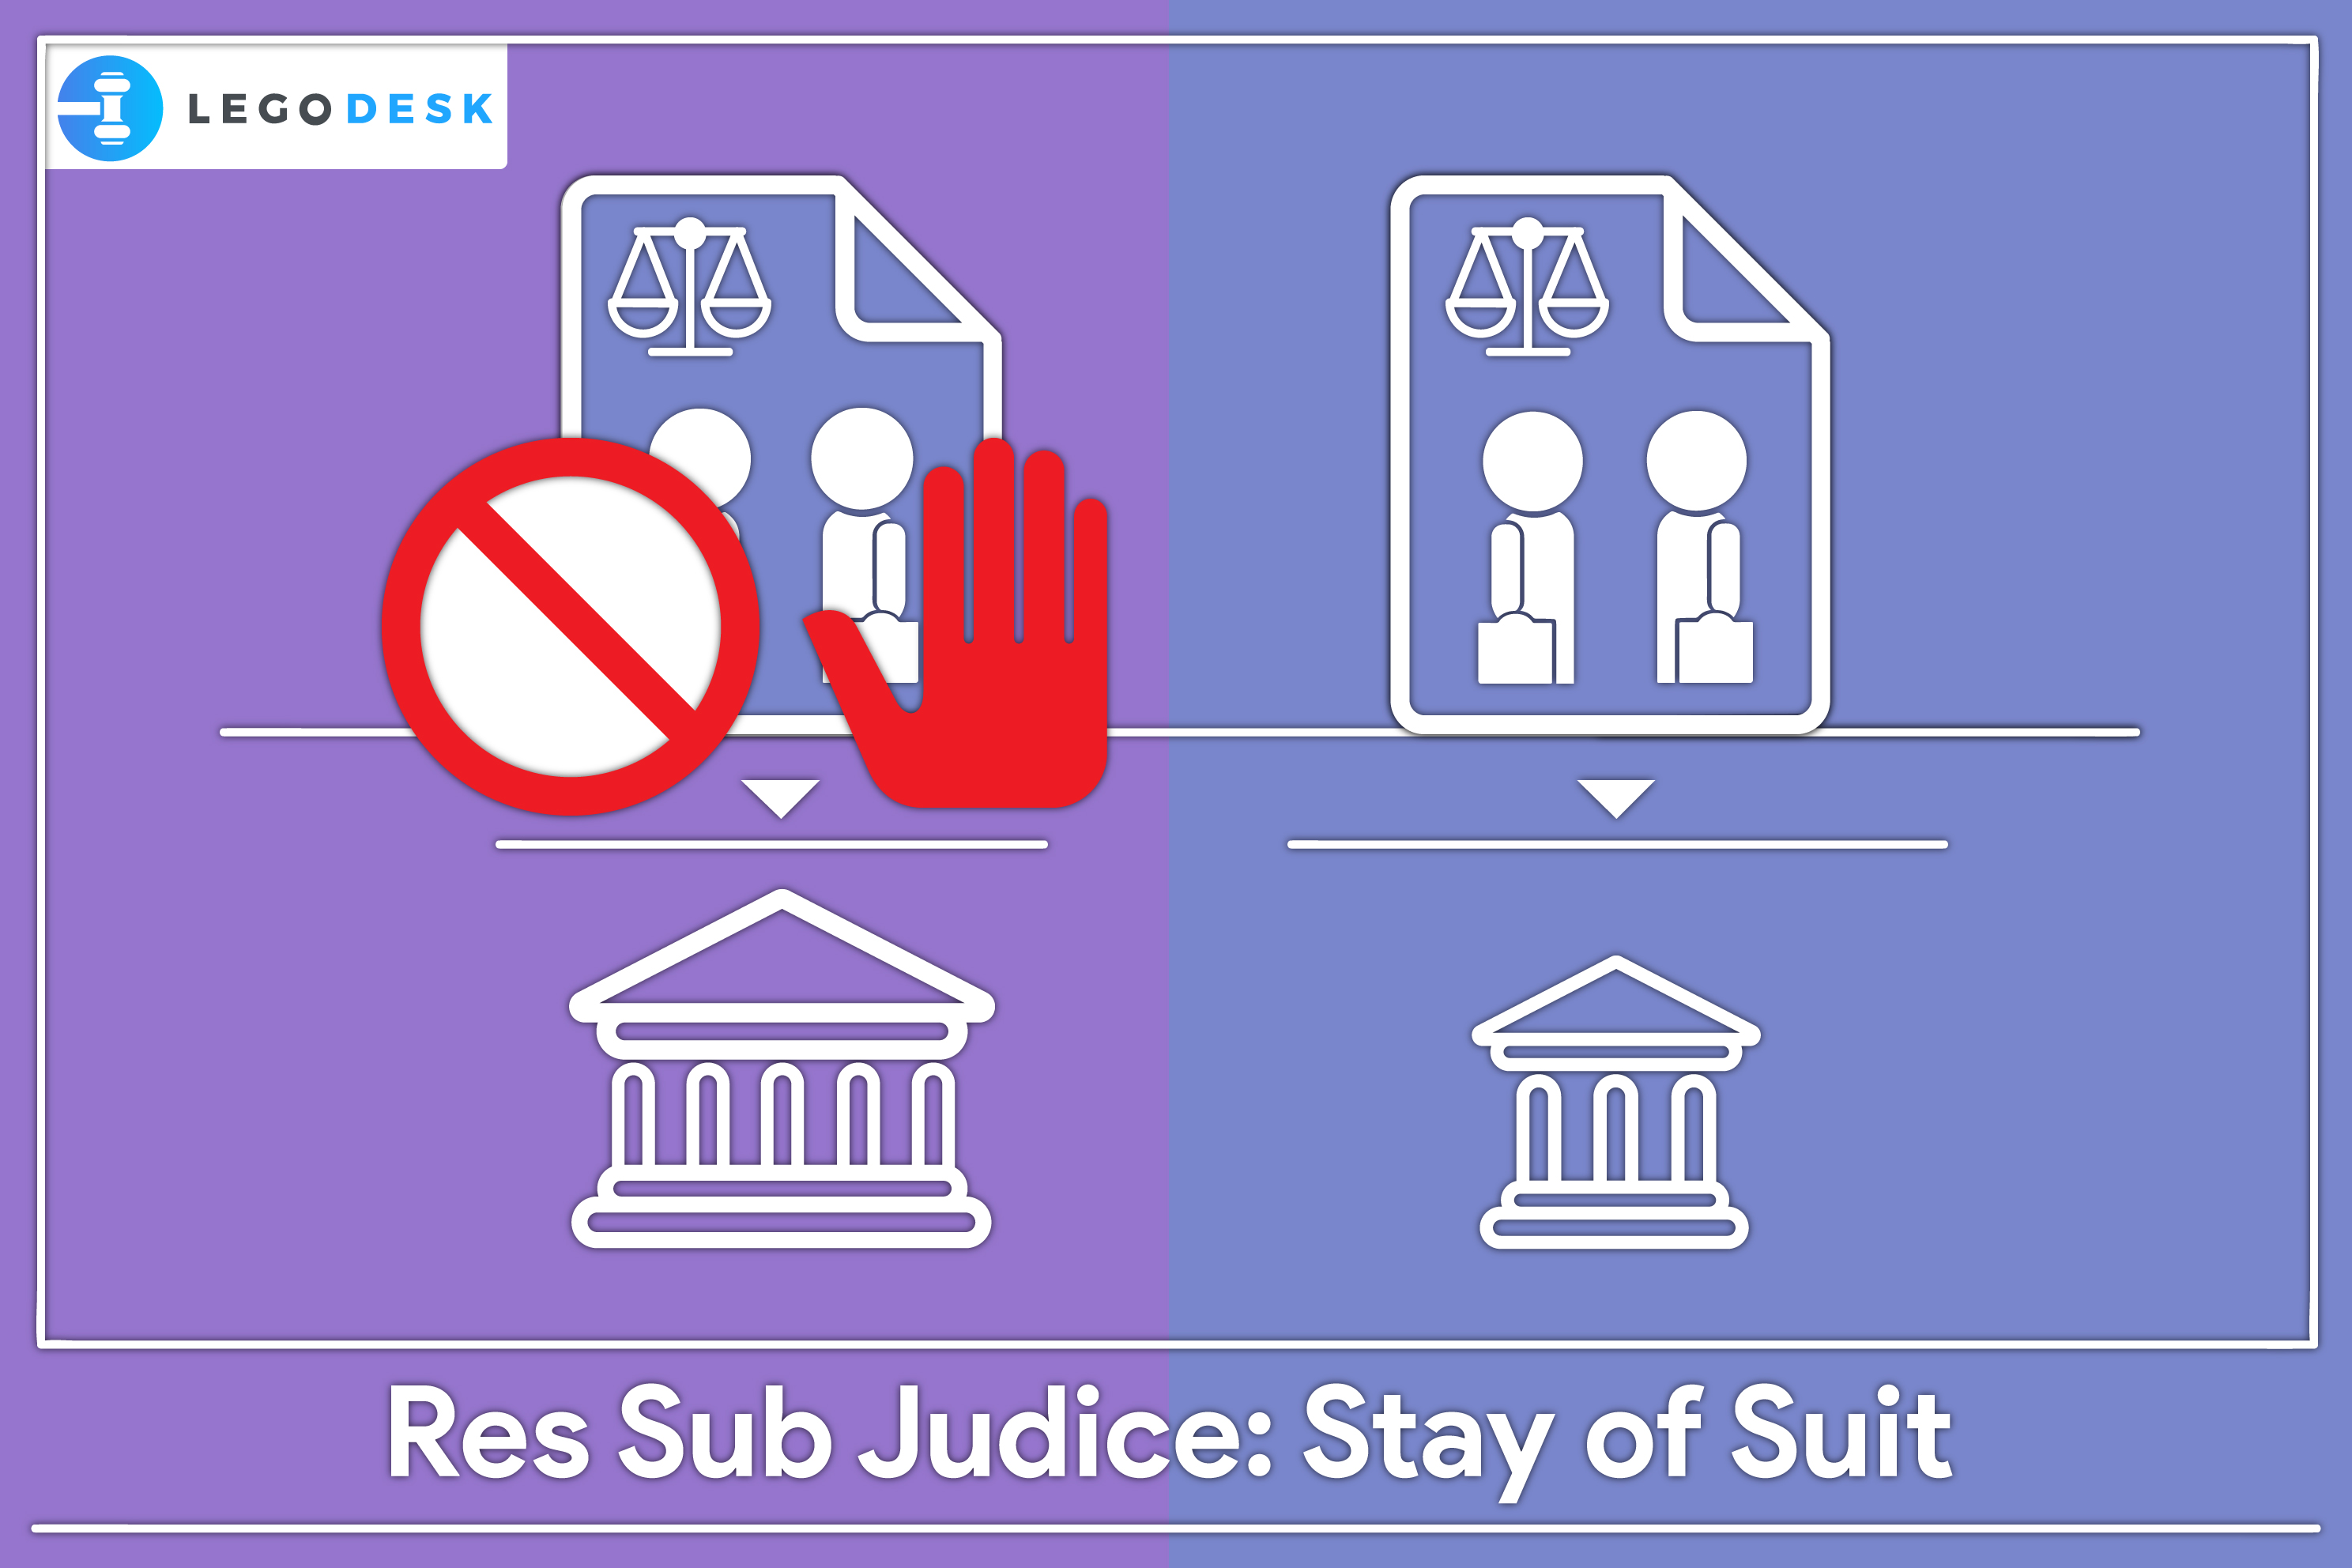 Res Sub Judice: Stay of Suit